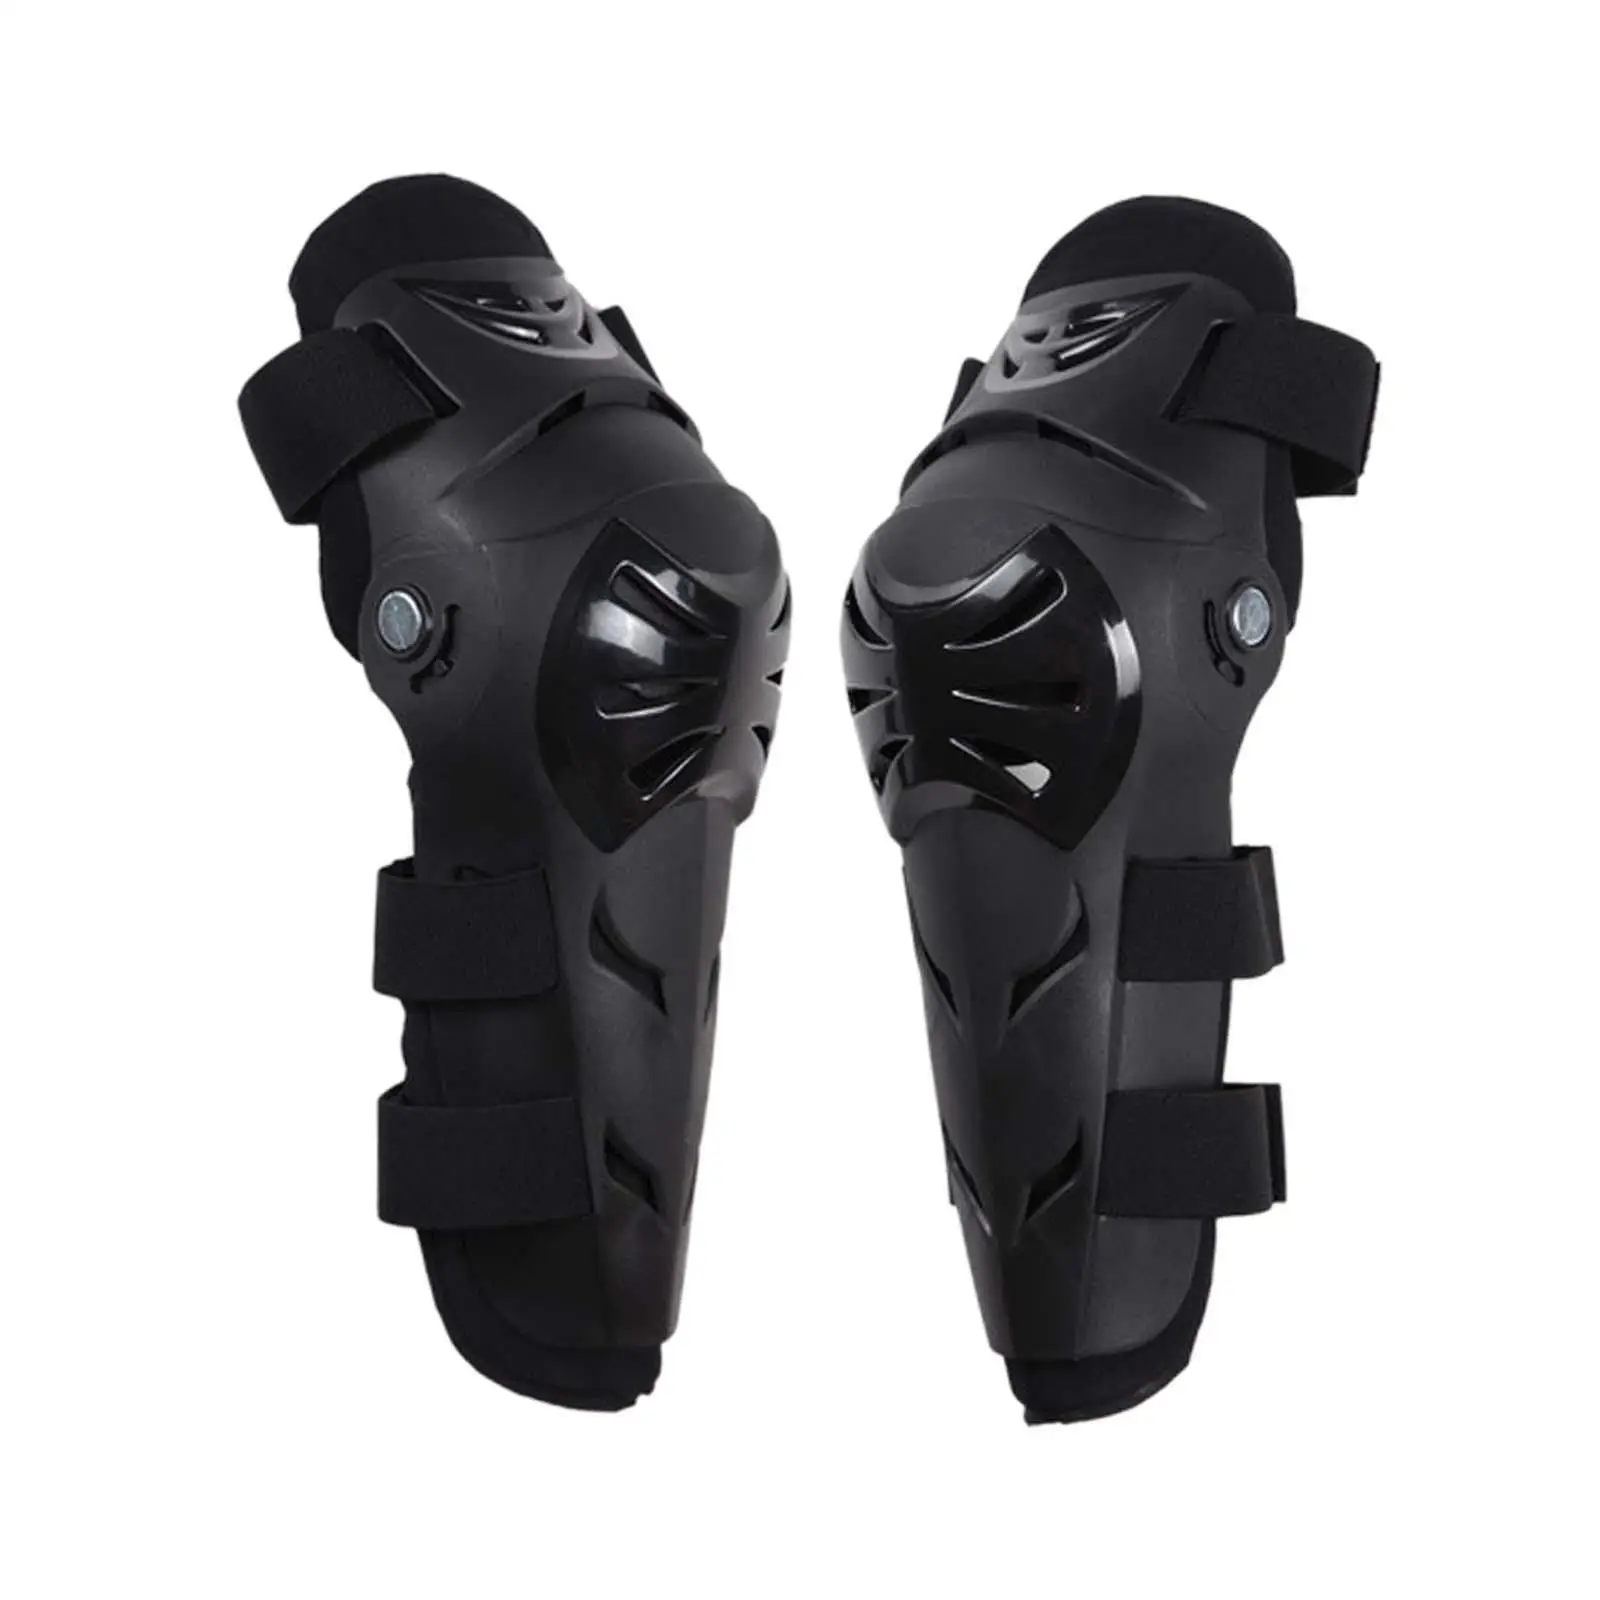 Motorcycle Knee Shin Guards Motocross Riding Guards Set Protective Knee Guard Pads for Sport Skating Motocross Skiing